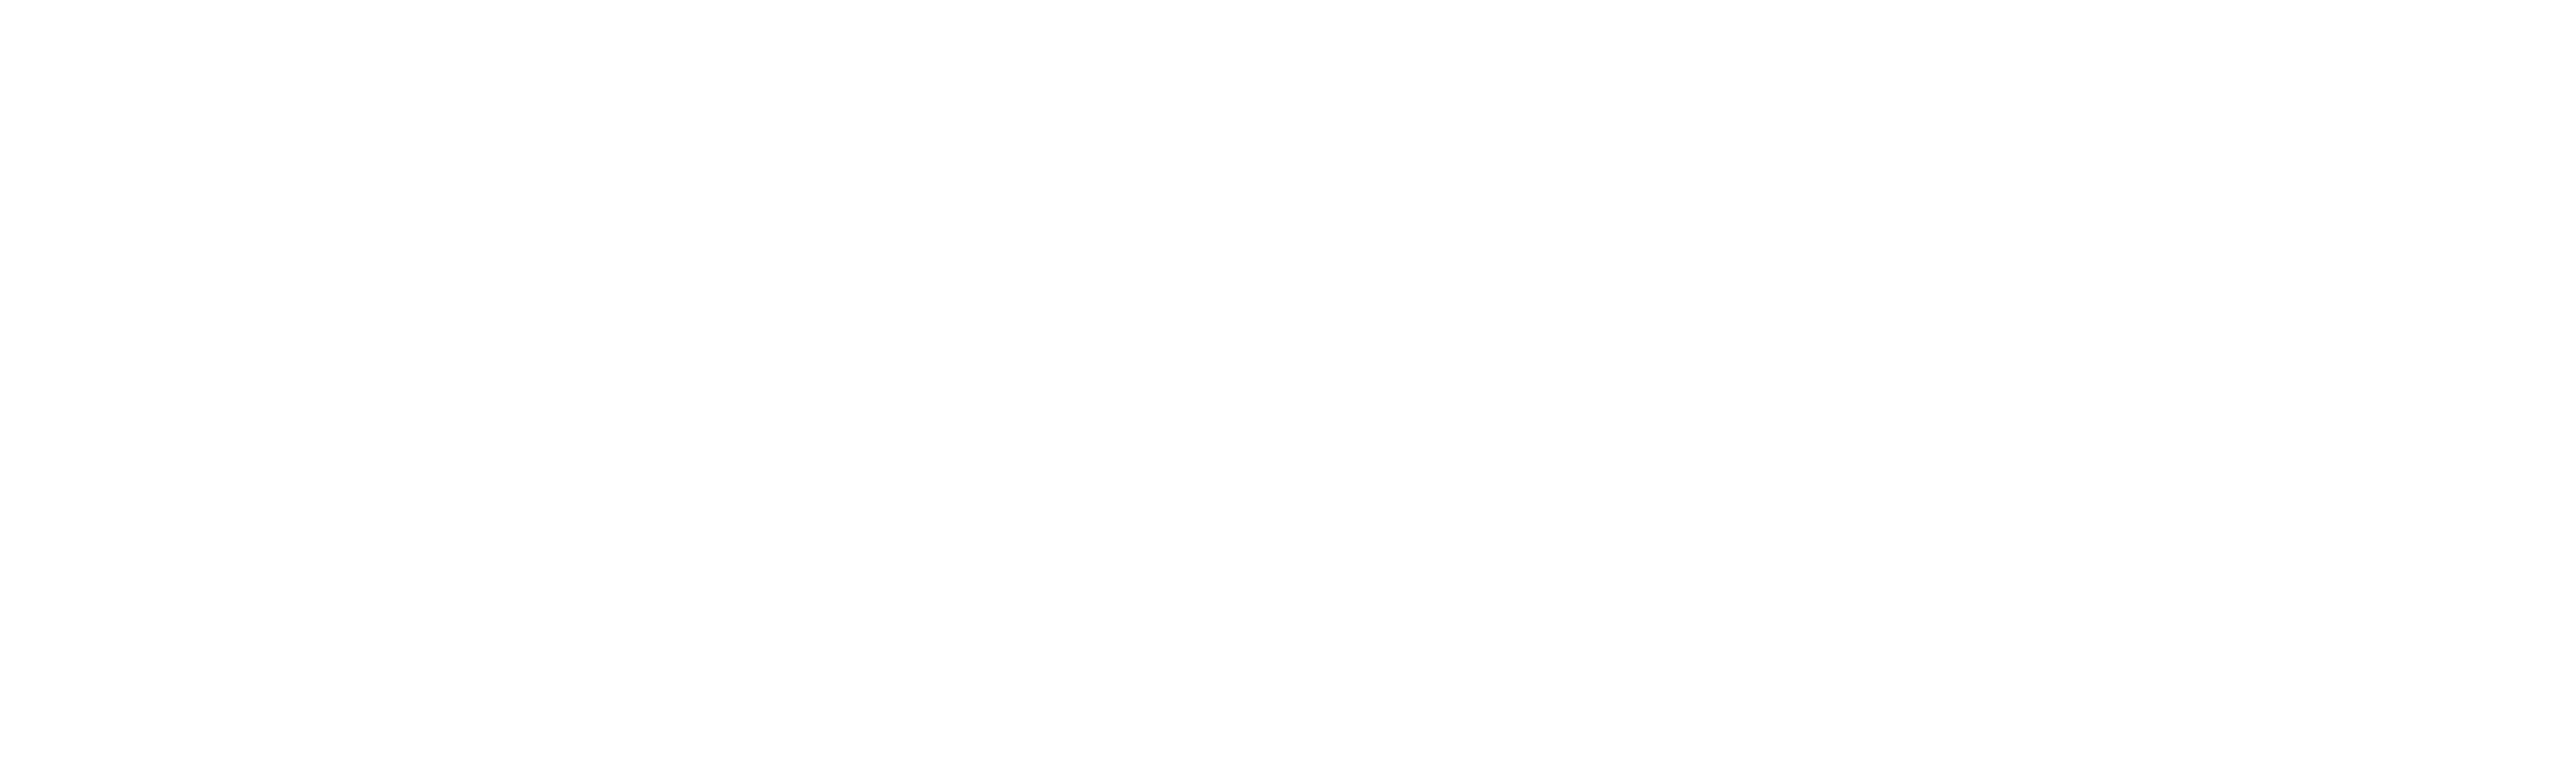 i now pronounce you chuck and larry black guy